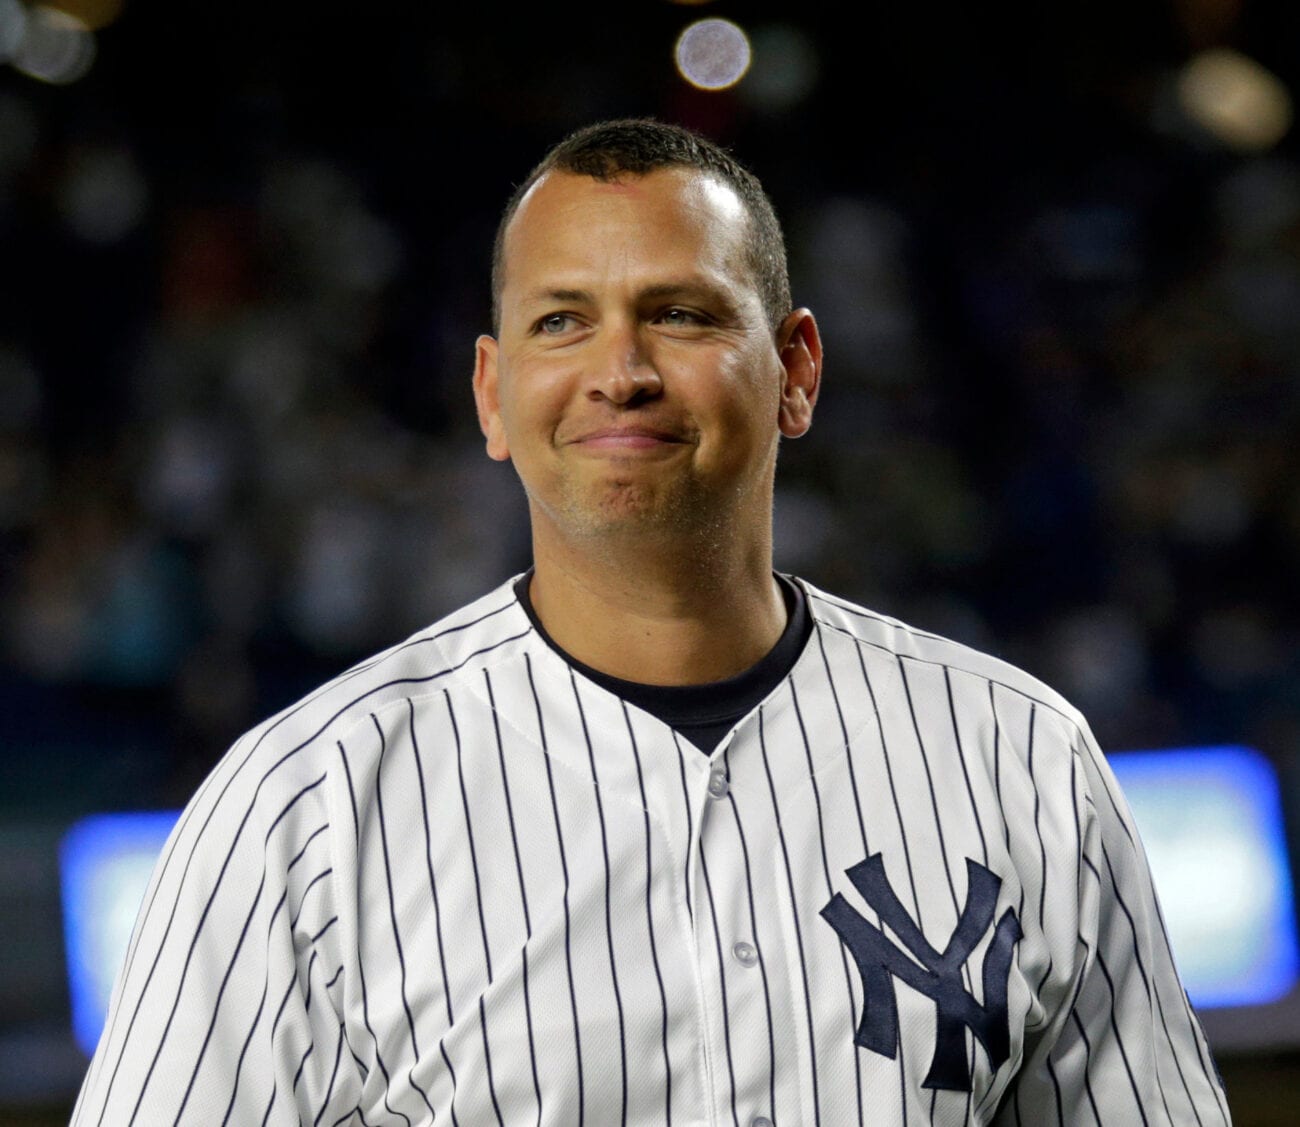 Think what you will about Alex Rodriguez, but you cannot deny this former baseball prodigy's huge net worth, a number so large it must have used steroids.